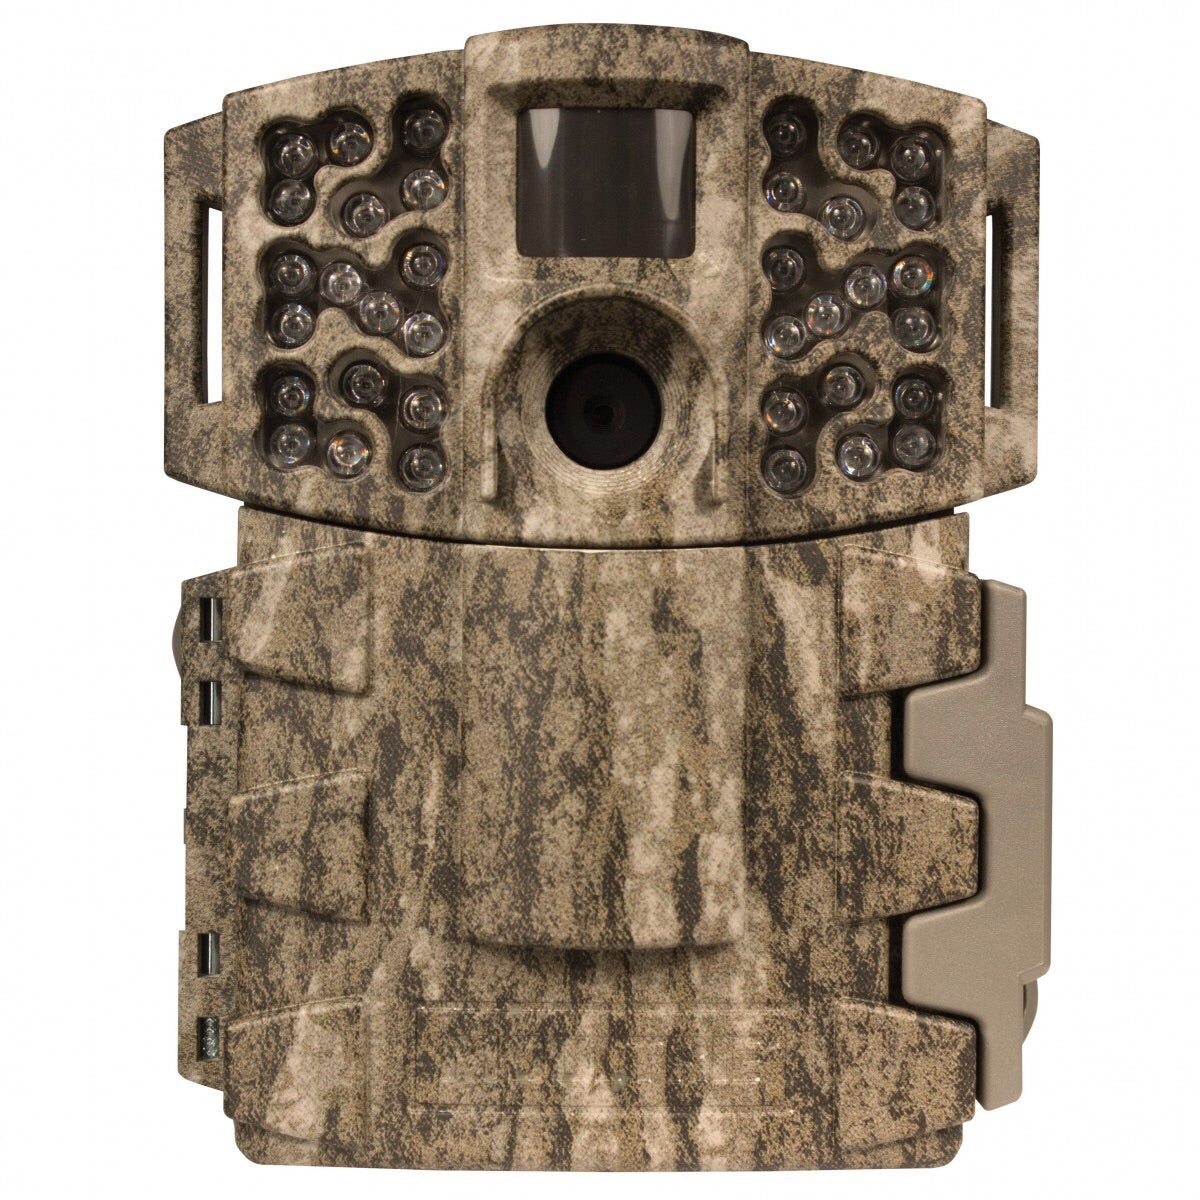 Moultrie m-888i 14.0MP